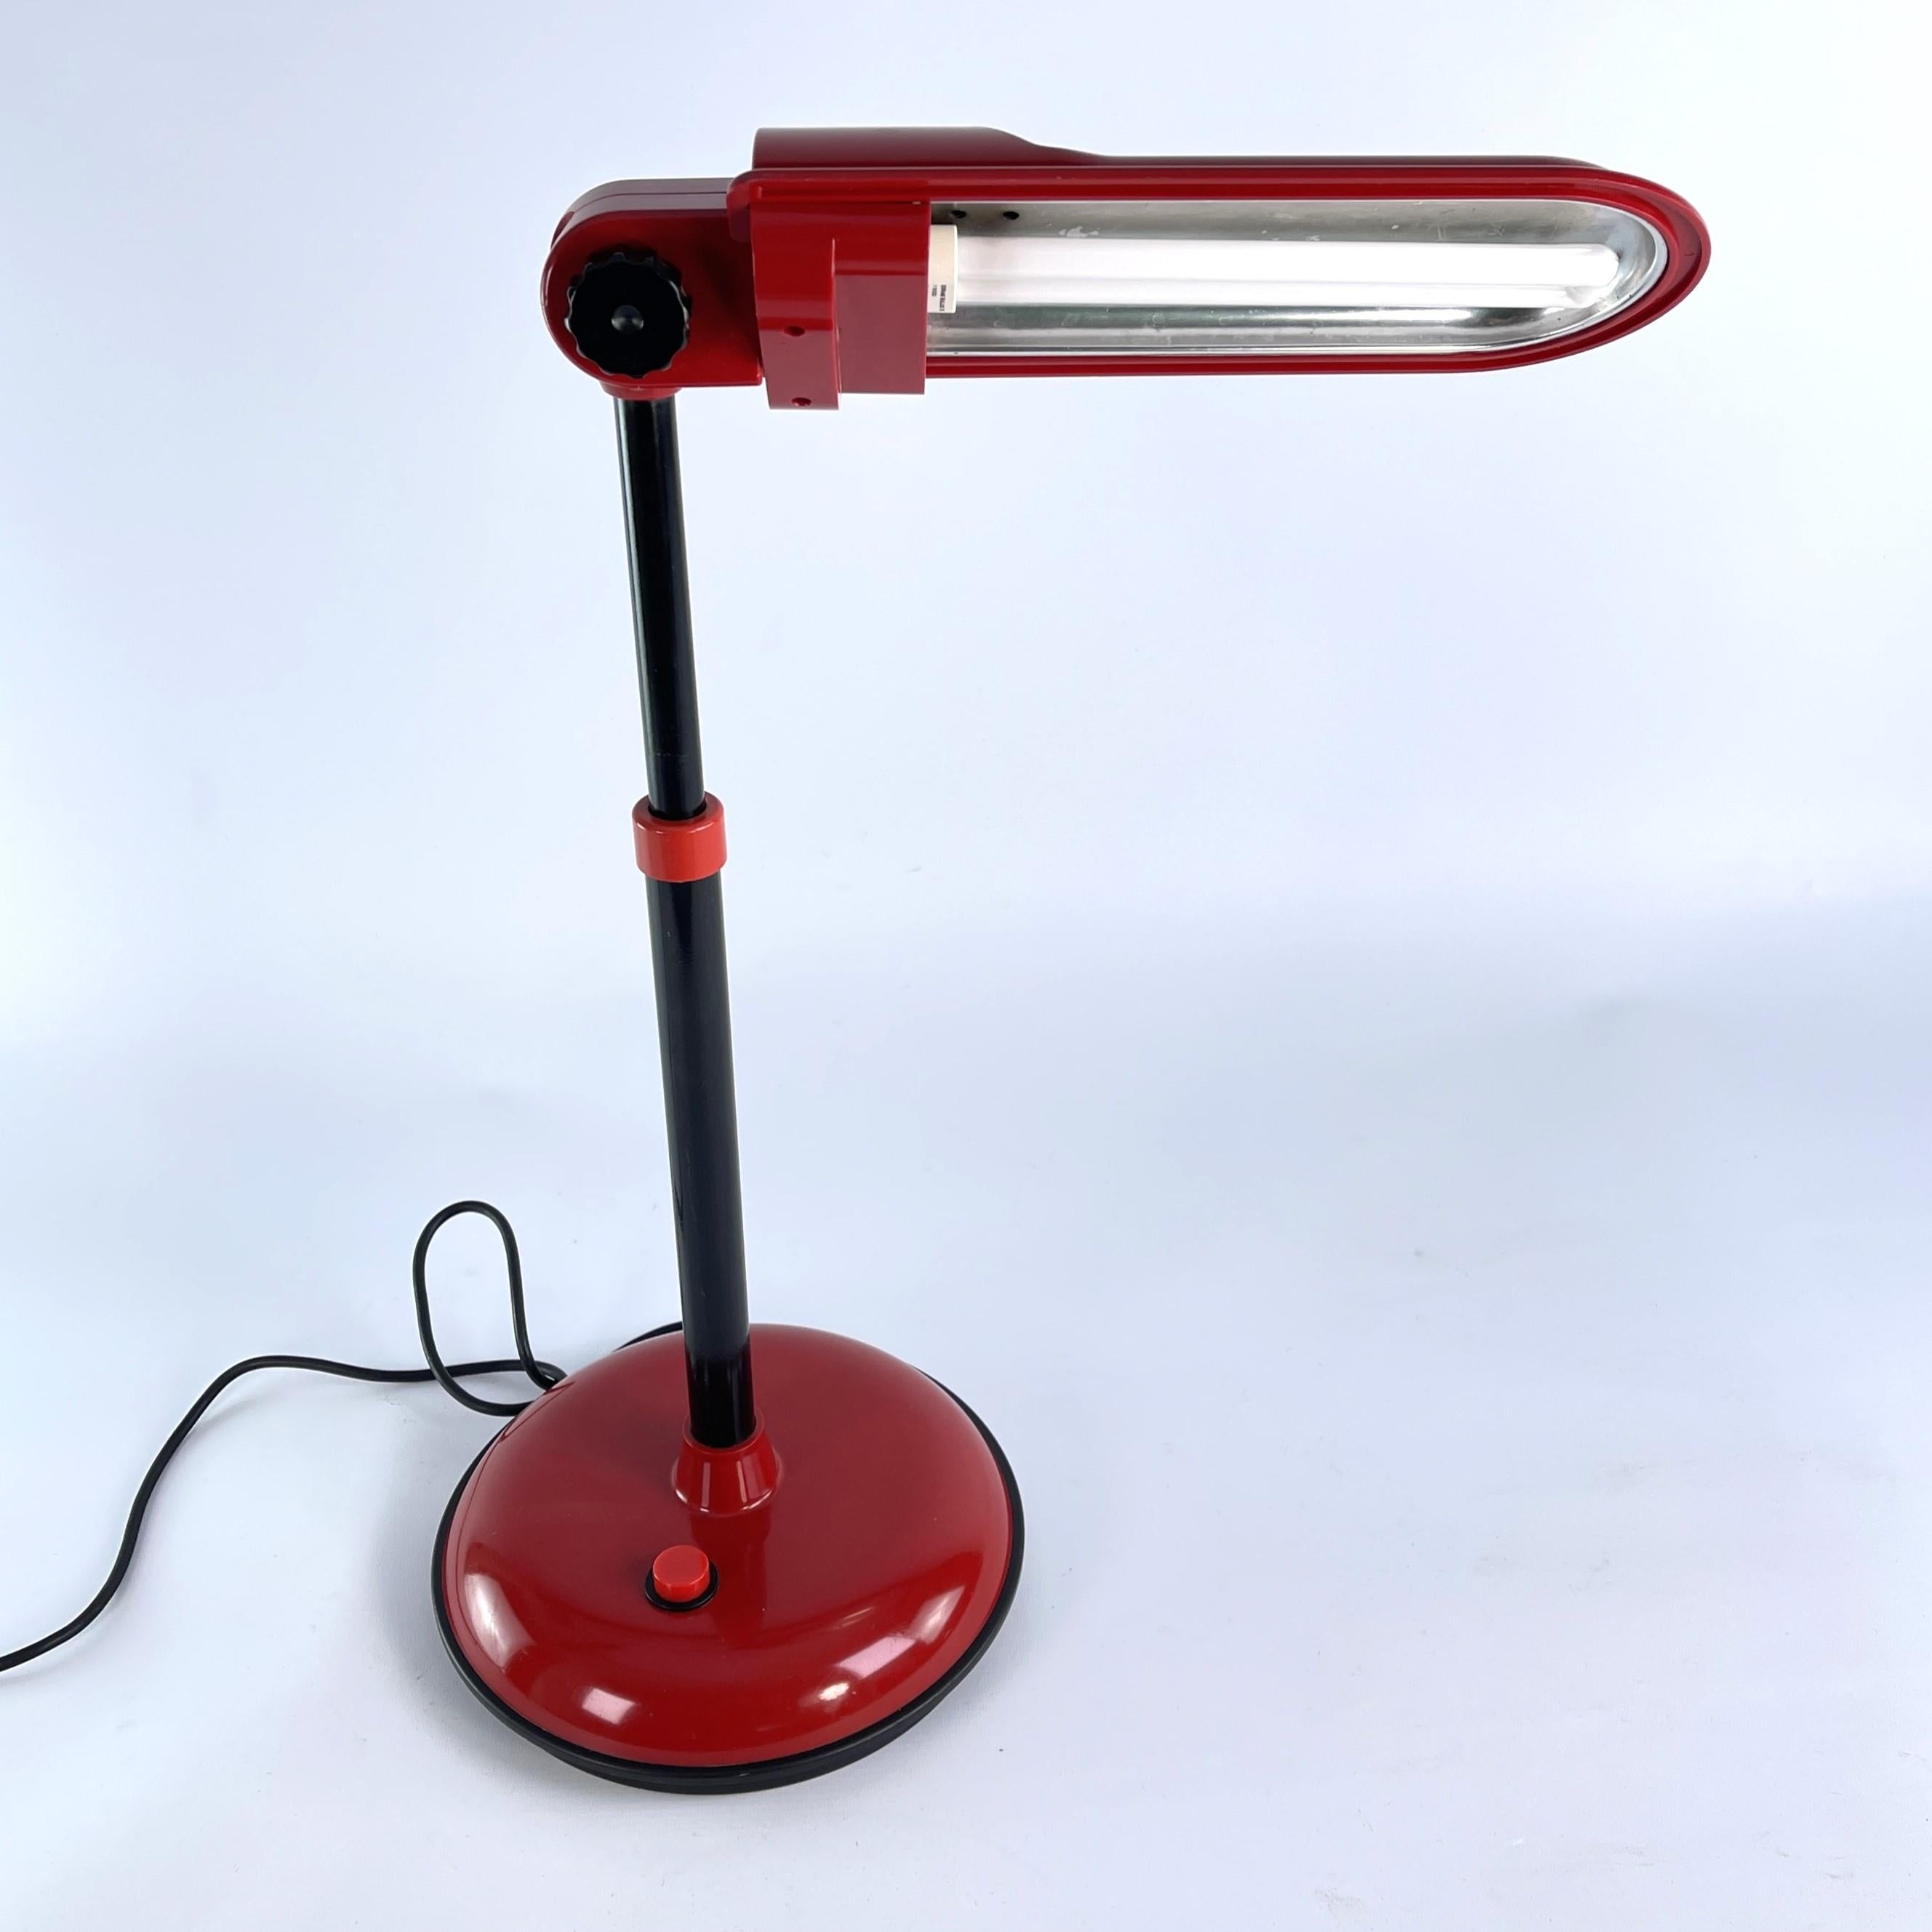 red MAZDA table lamp

This rare, original table lamp from the well-known MAZDA company impresses with its simple and functional design. The work lamp is height-adjustable and provides a pleasant light.

The cleaned item  weights 3.95 kg / 8.71 lbs.
